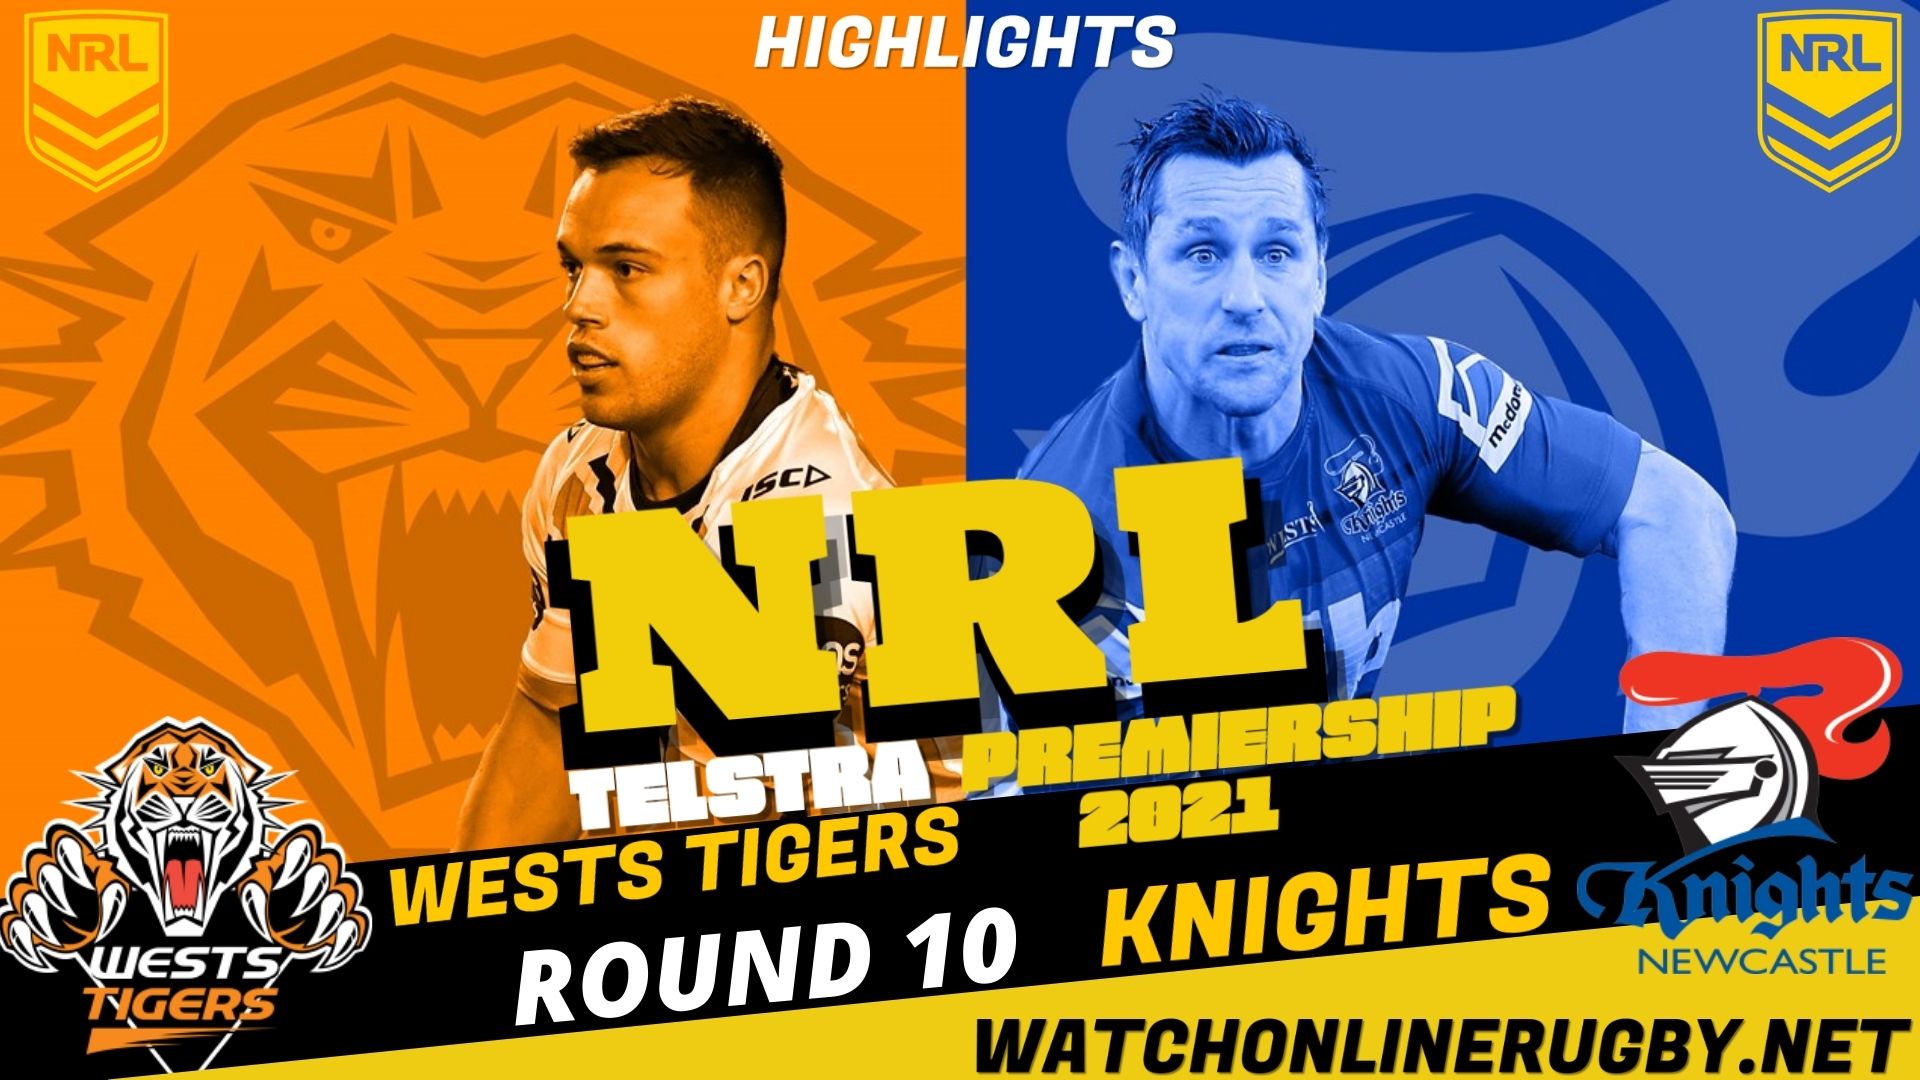 Wests Tigers Vs Knights Highlights RD 10 NRL Rugby